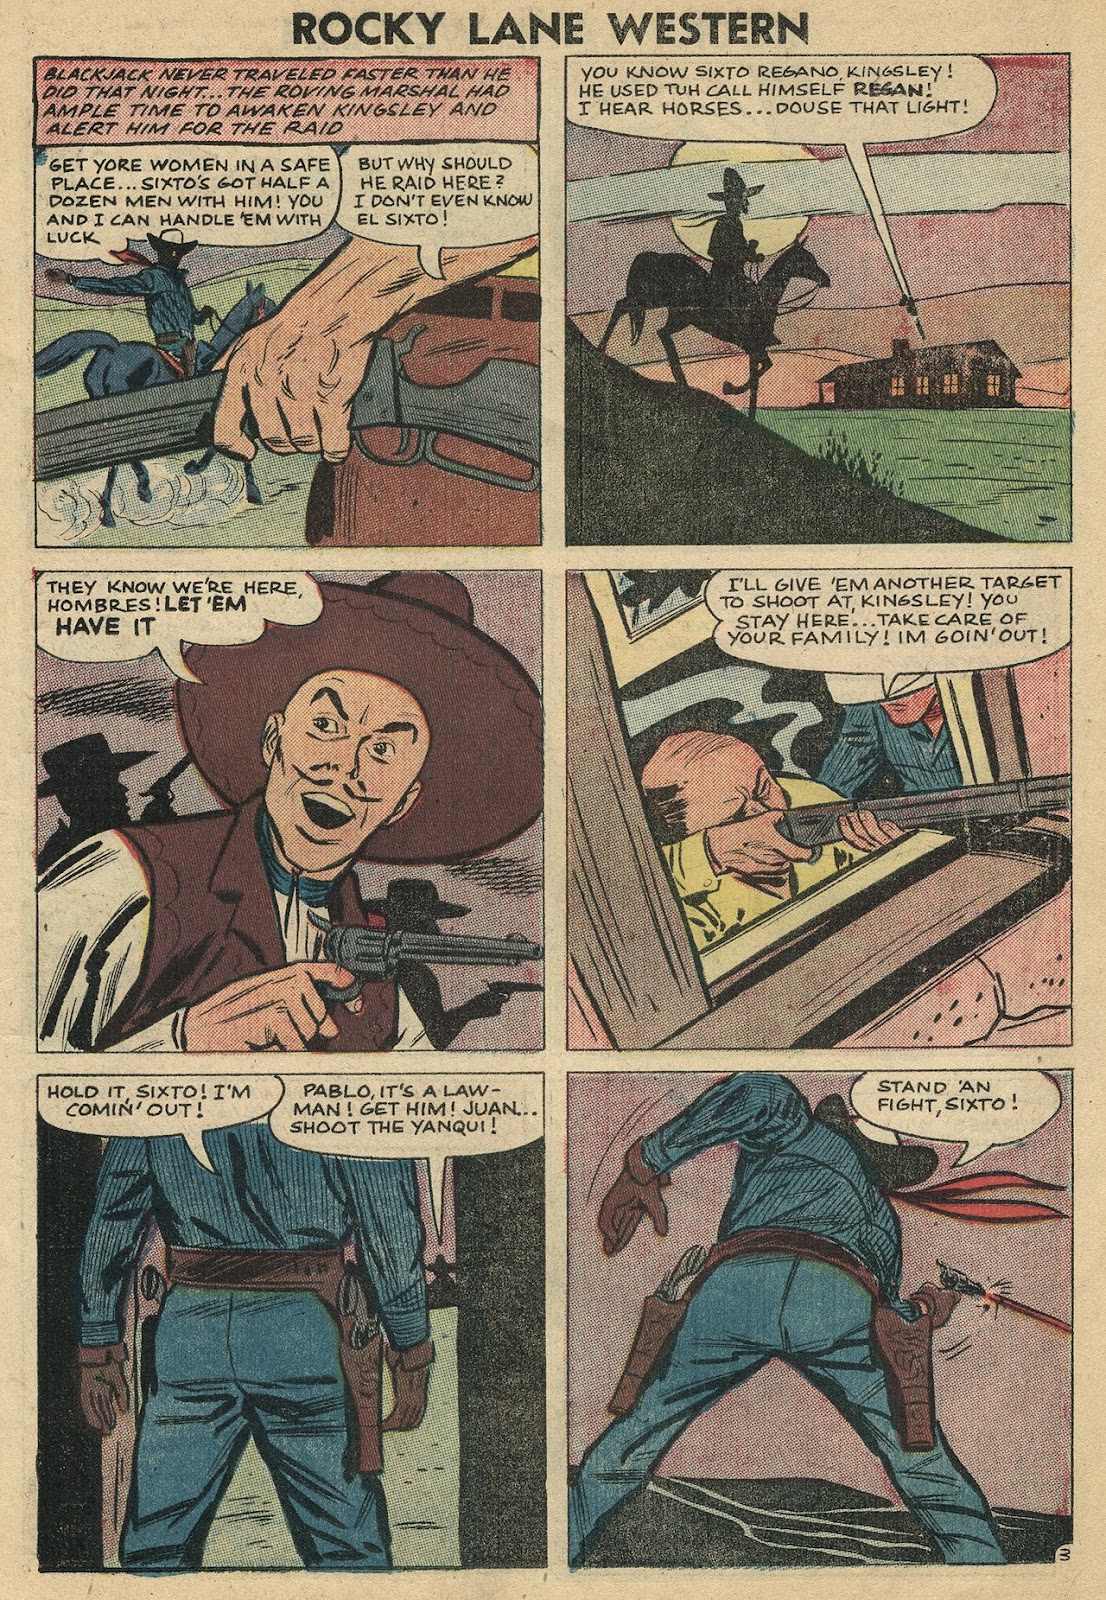 Rocky Lane Western (1954) issue 82 - Page 11